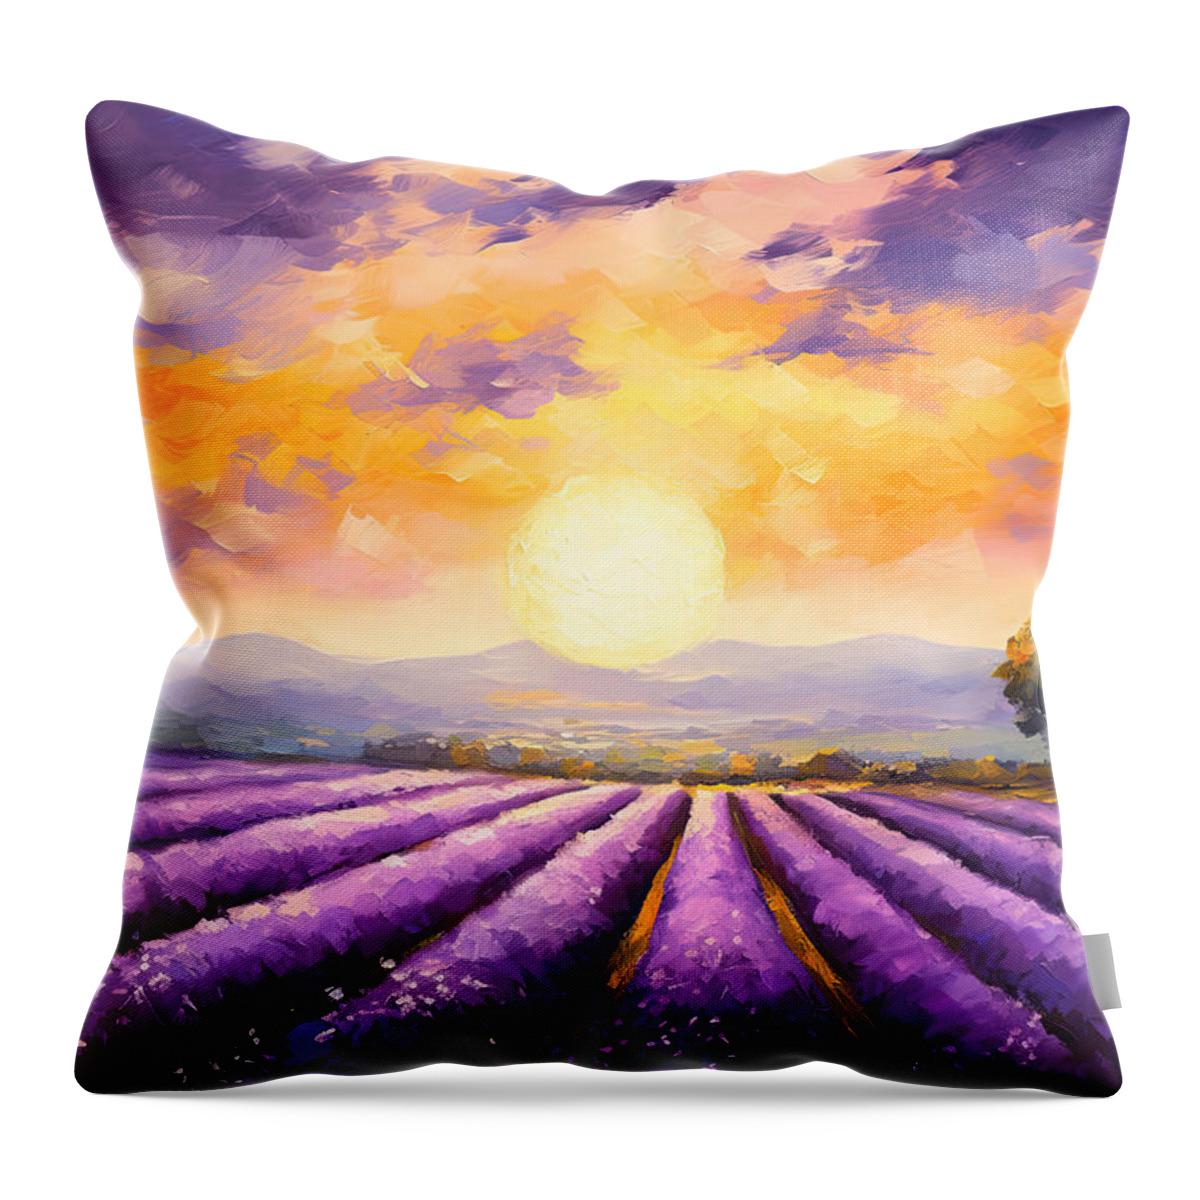 Lavender Throw Pillow featuring the painting Menacing Beauty - Lavender Fields Paintings by Lourry Legarde